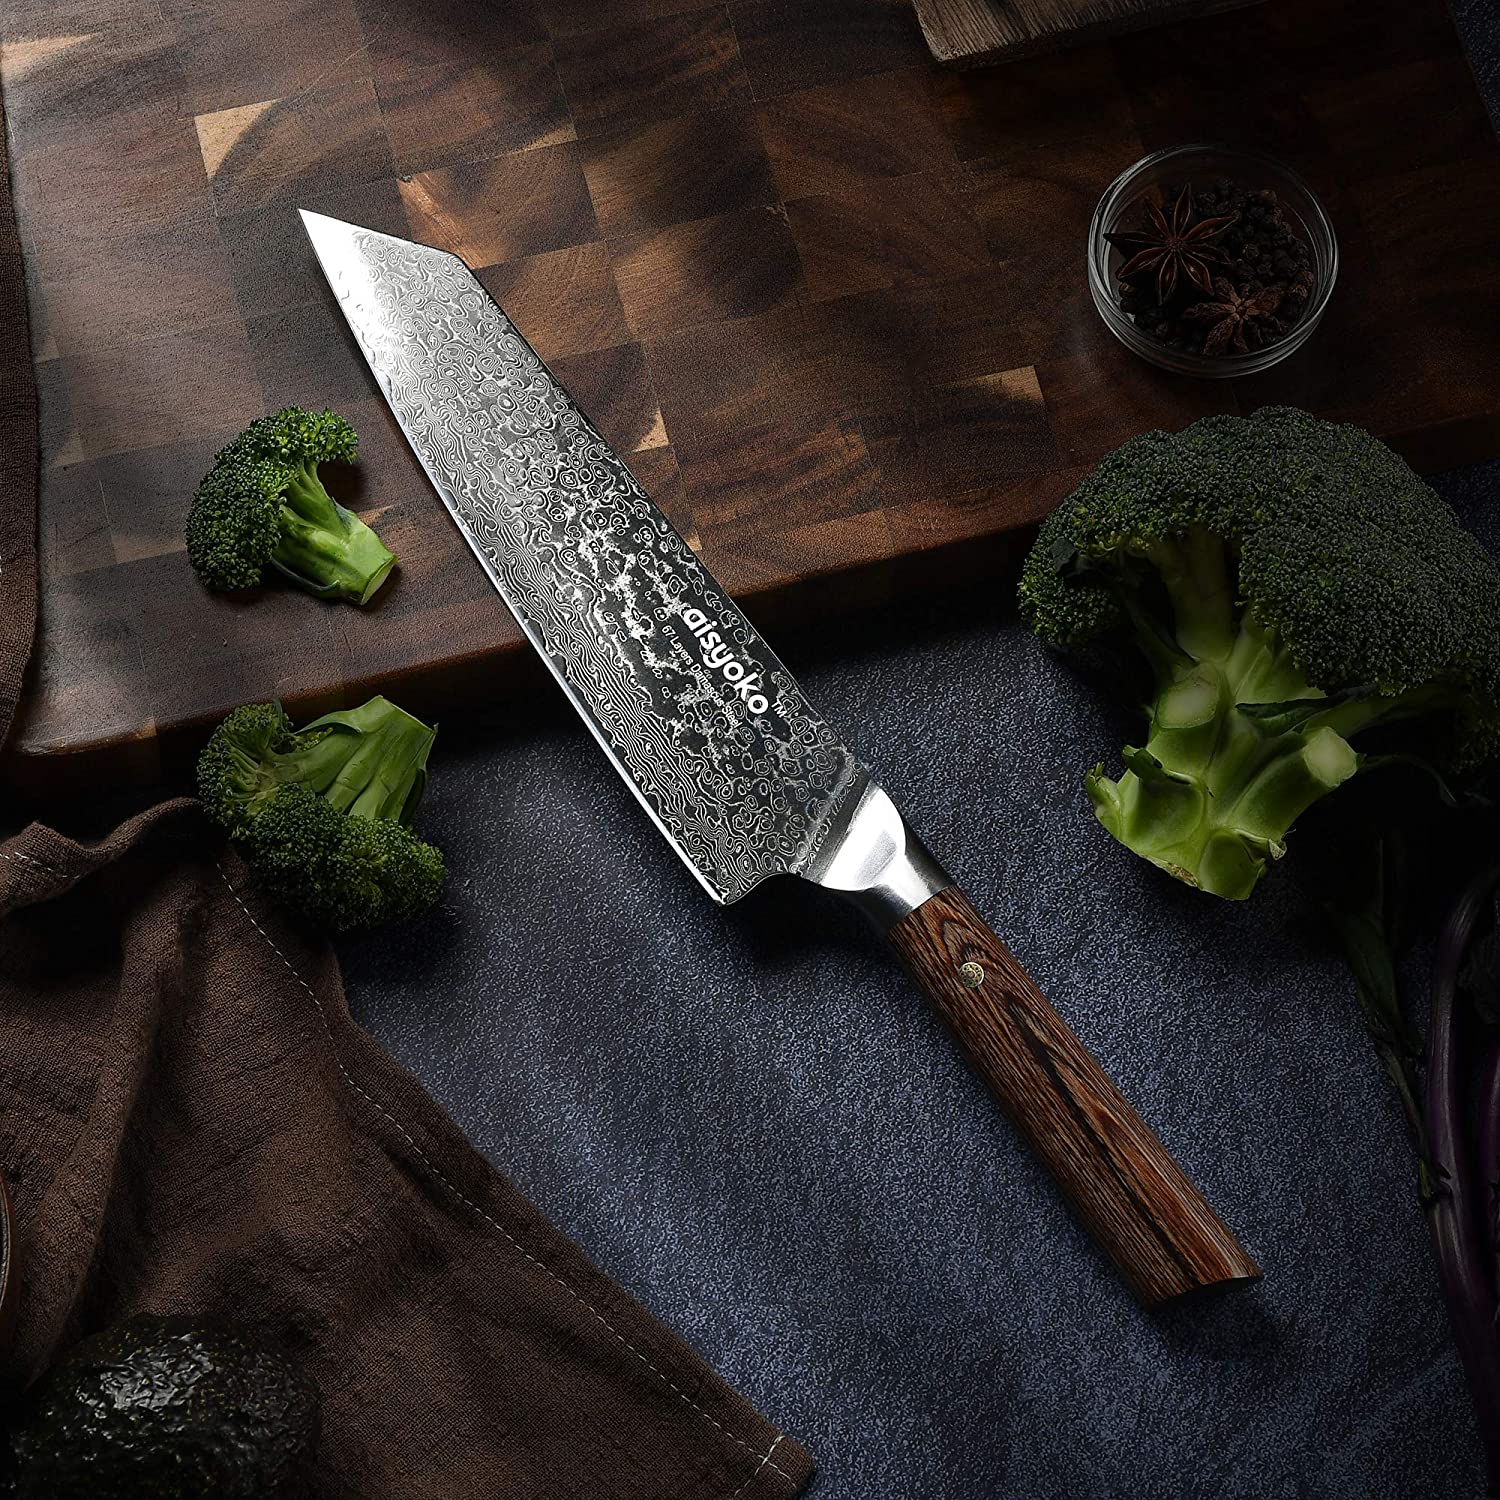 Buy Aisyoko Chef Knife 8 Inch Damascus Japan VG 10 Super Stainless Steel Professional High Carbon Super Sharp Kitchen Cooking Knife, Ergonomic Color Wooden Handle Luxury Gift Box Online In Turkey. B08YXRRTHV